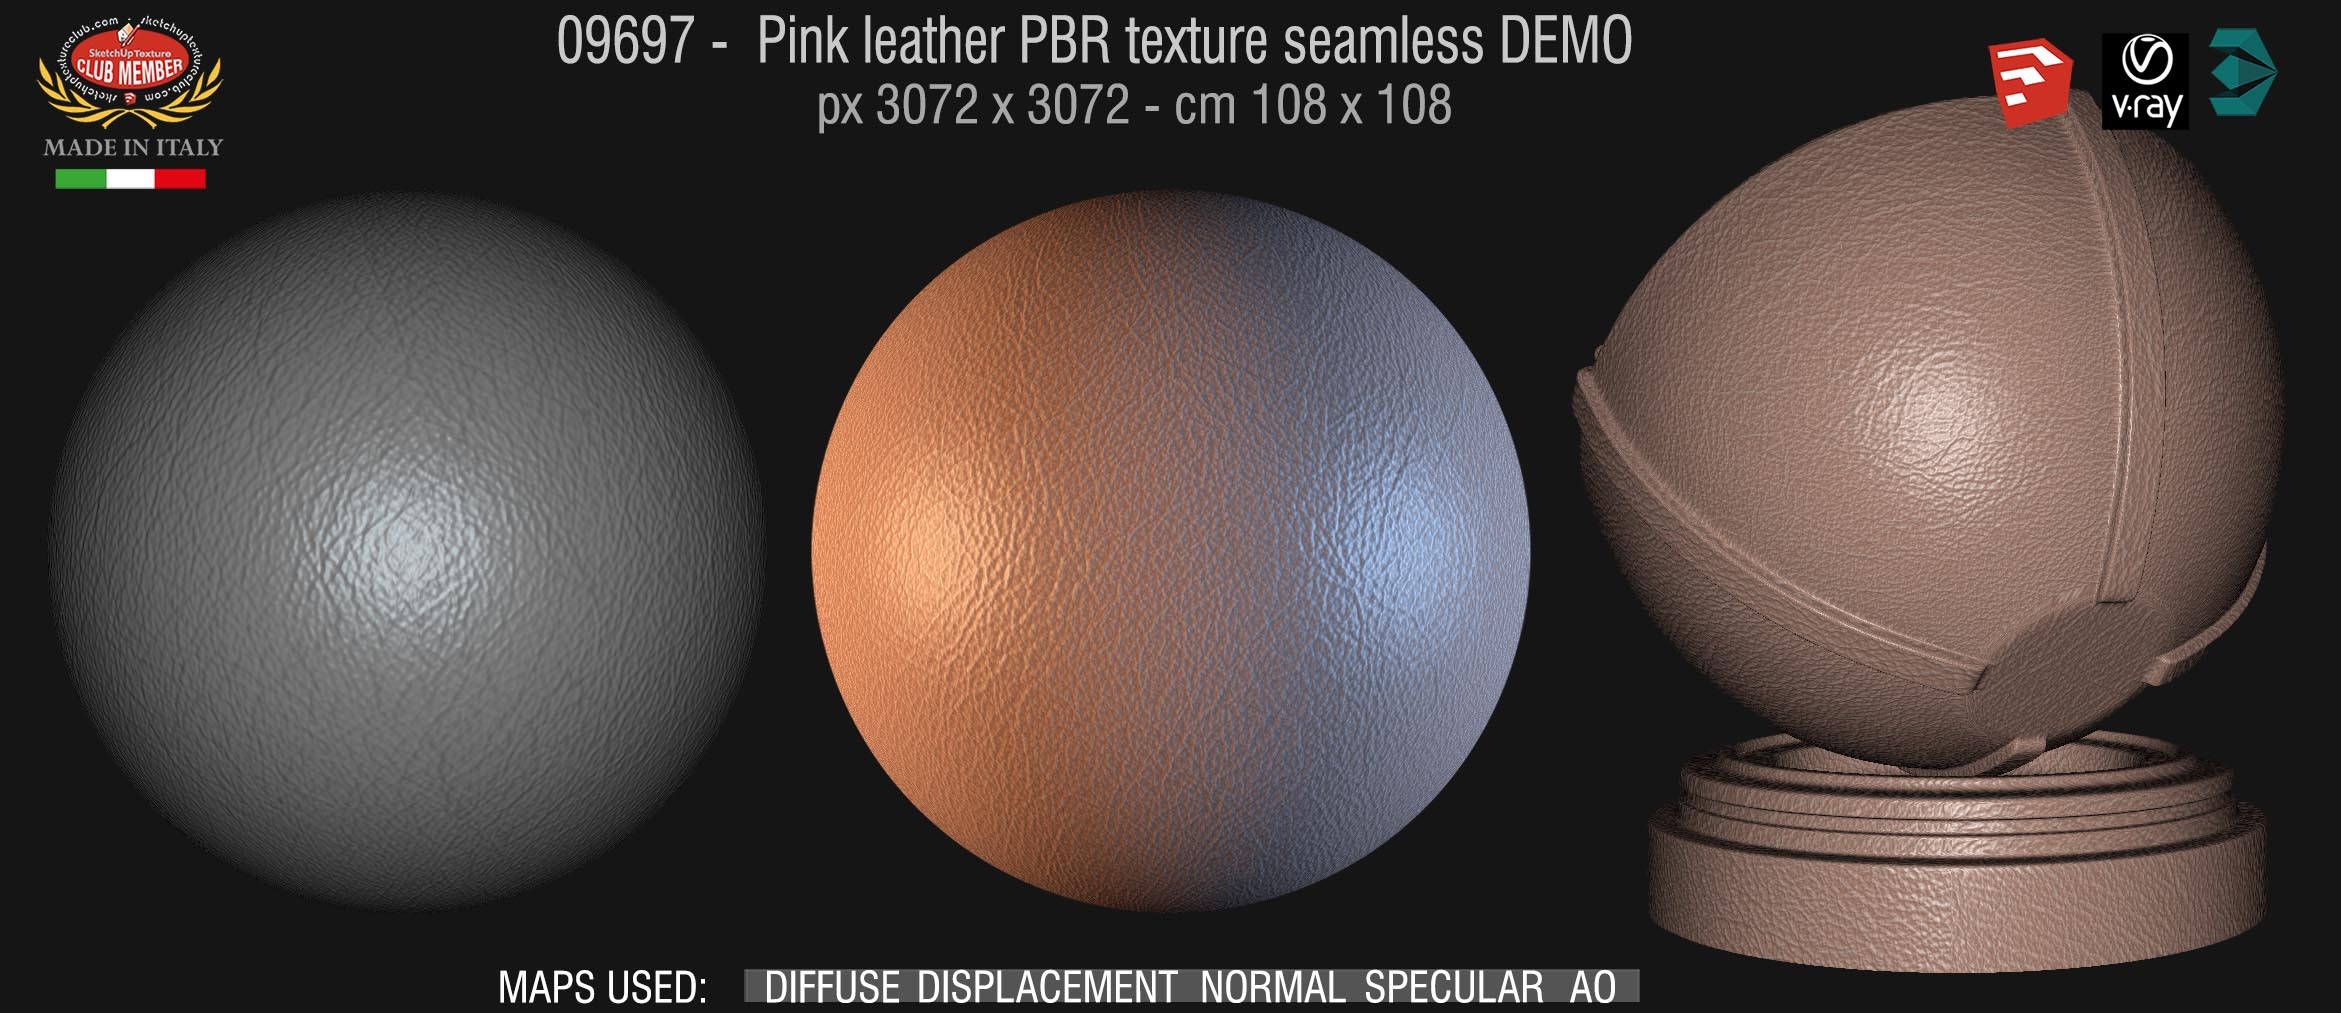 09697 Pink leather PBR texture seamless DEMO